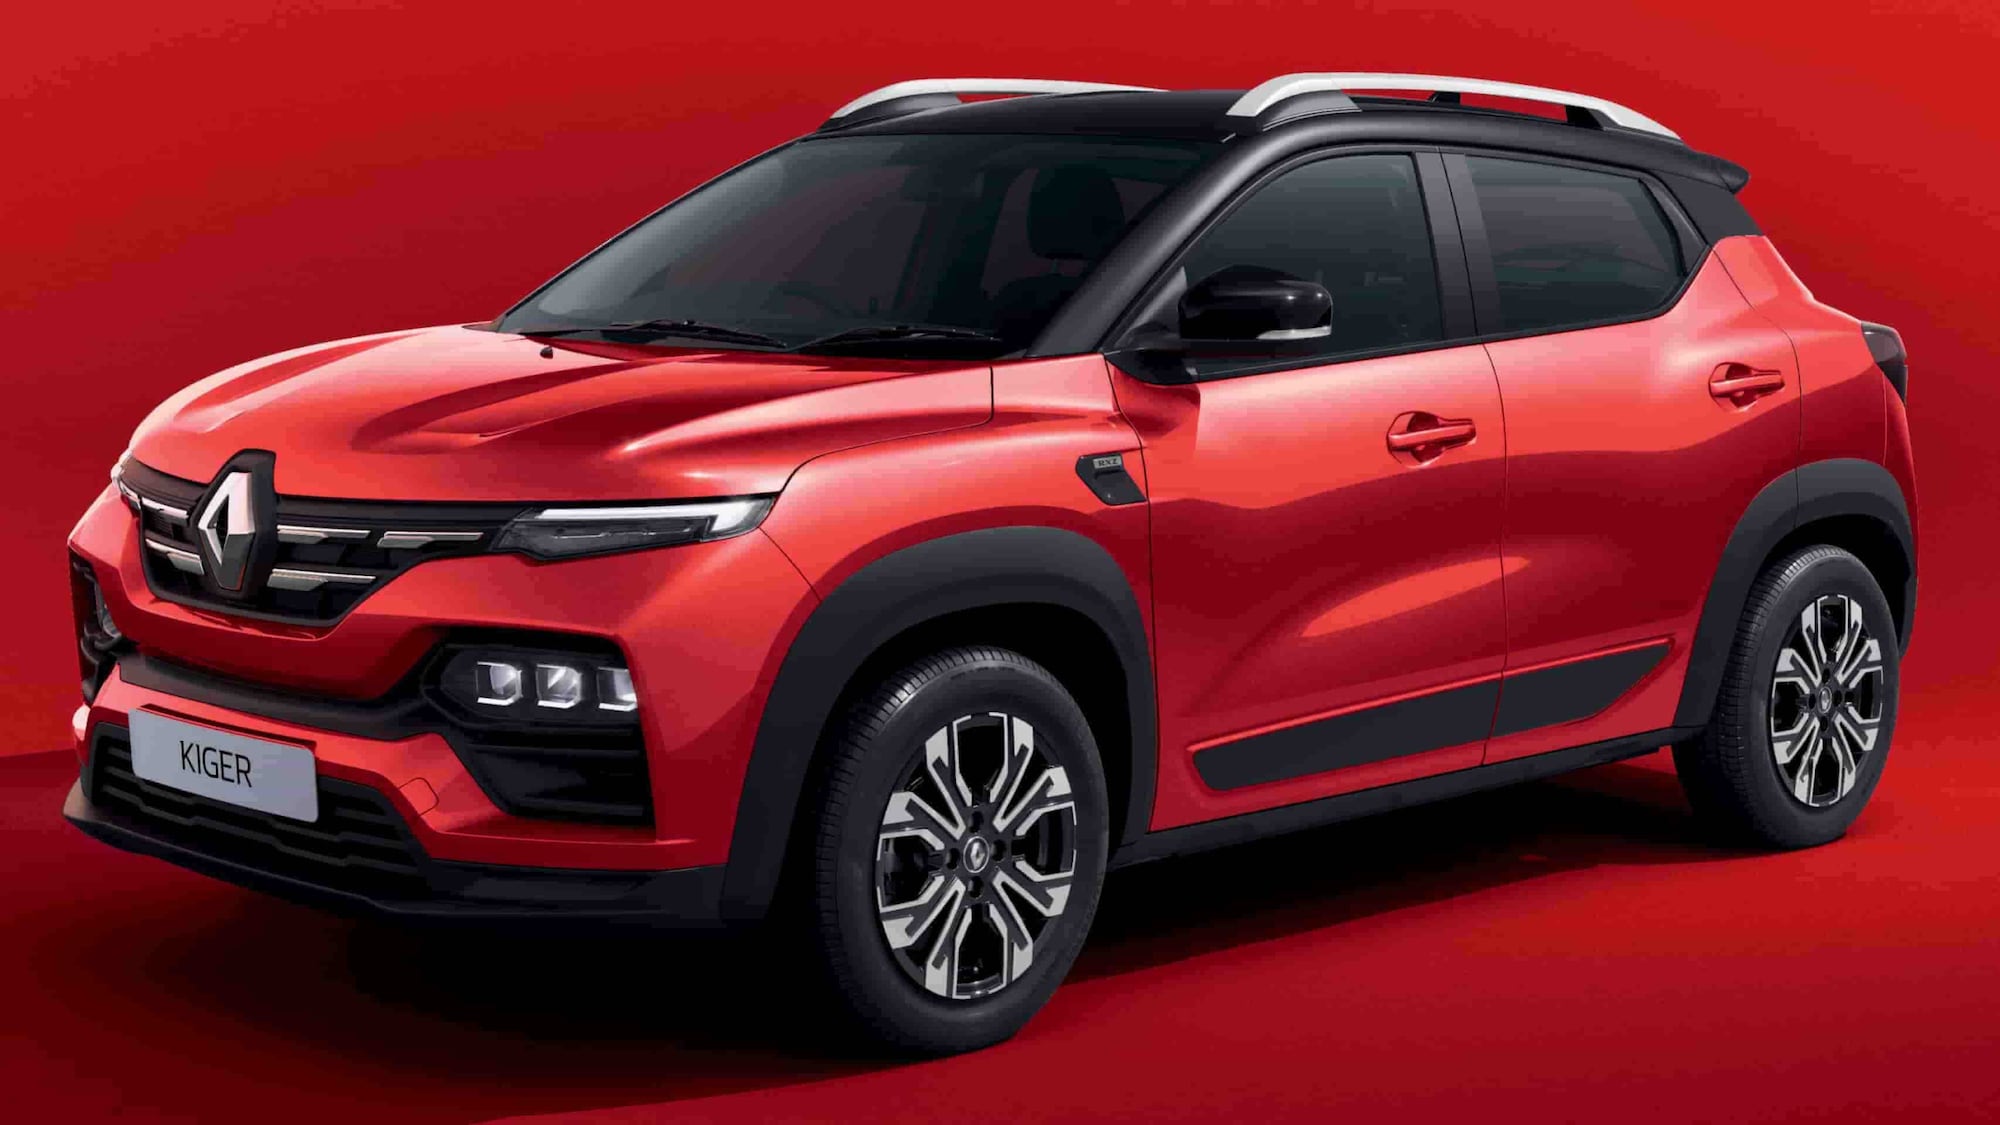  Renault Kiger India launch in India today, to be among the most affordable compact SUVs